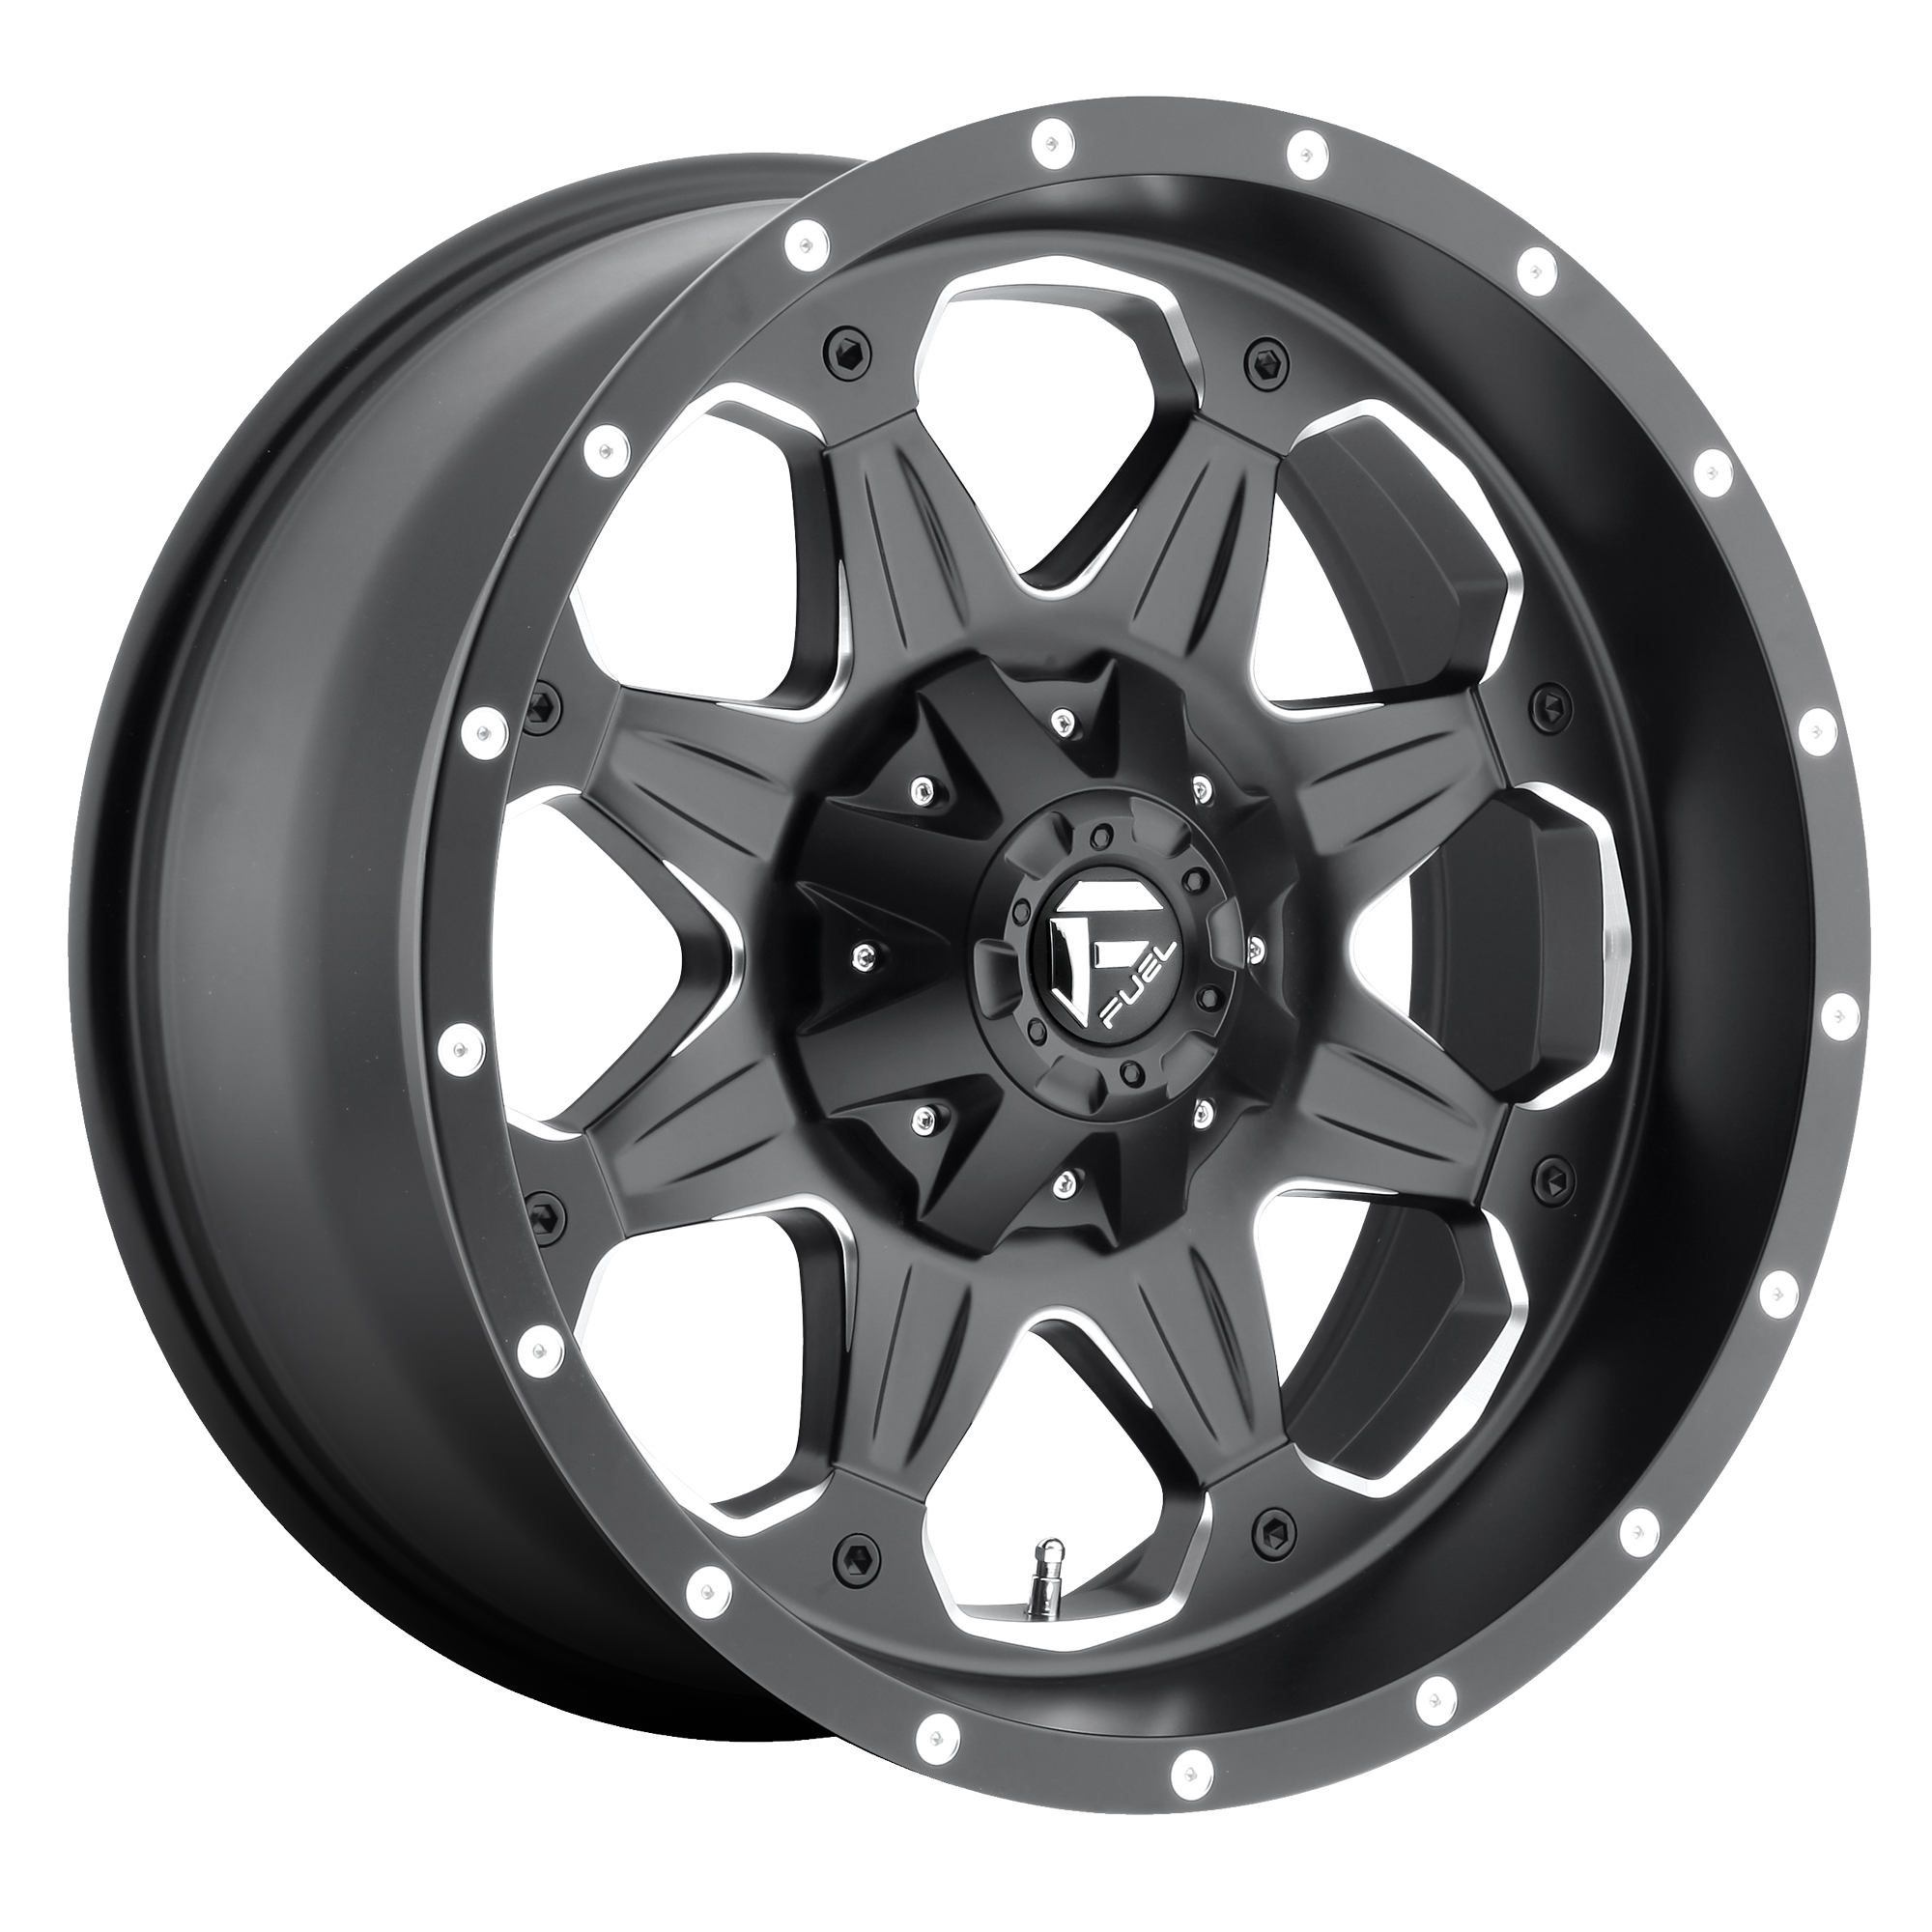 BOOST 16x8 5x114.30/5x127.00 MATTE BLACK MILLED (1 mm) - Tires and Engine Performance